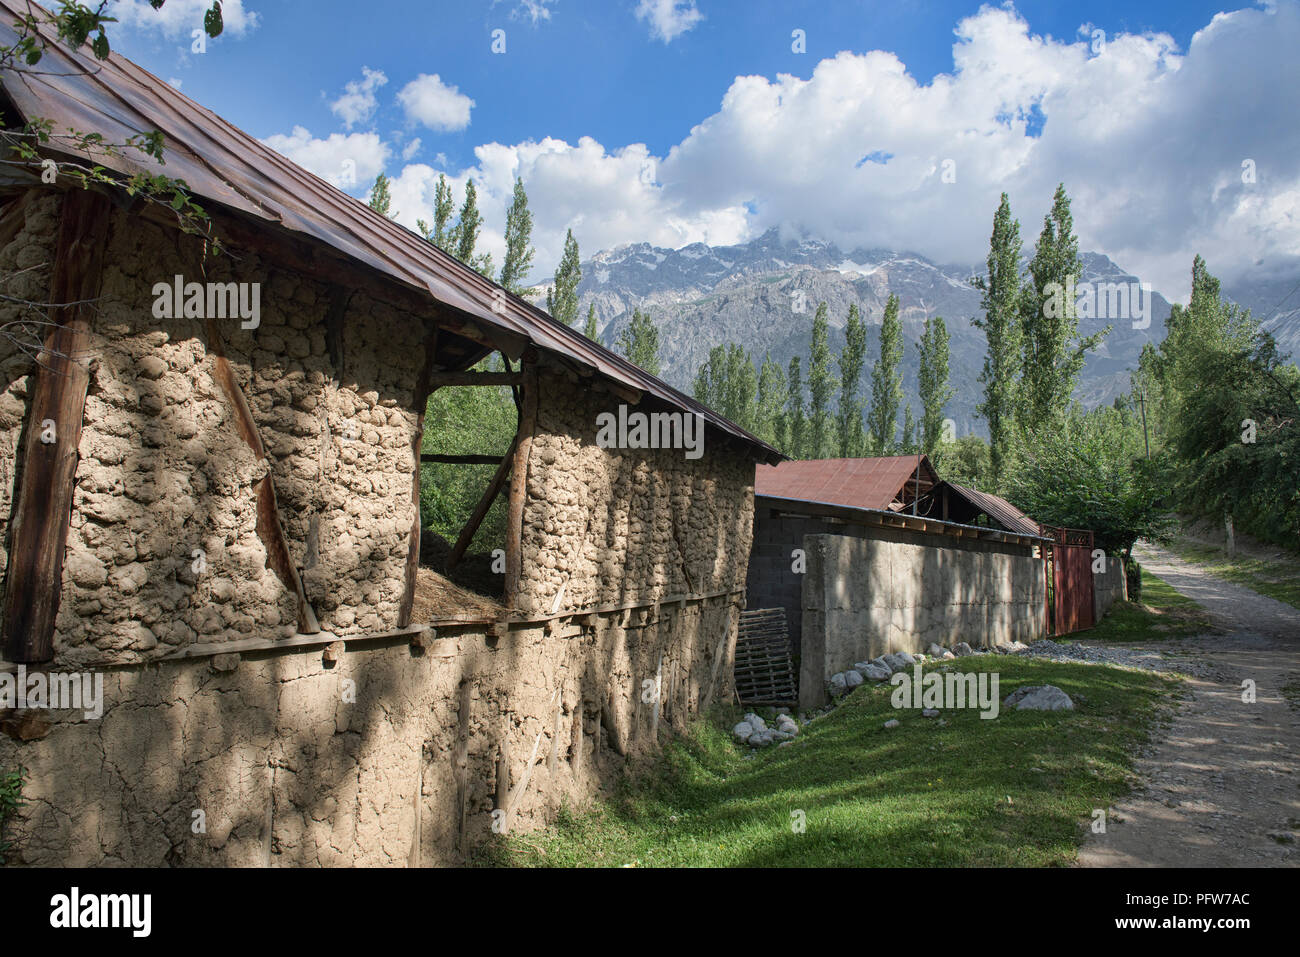 Traditional farm and high peaks above the walnut village of Arslanbob, Kygyzstan Stock Photo